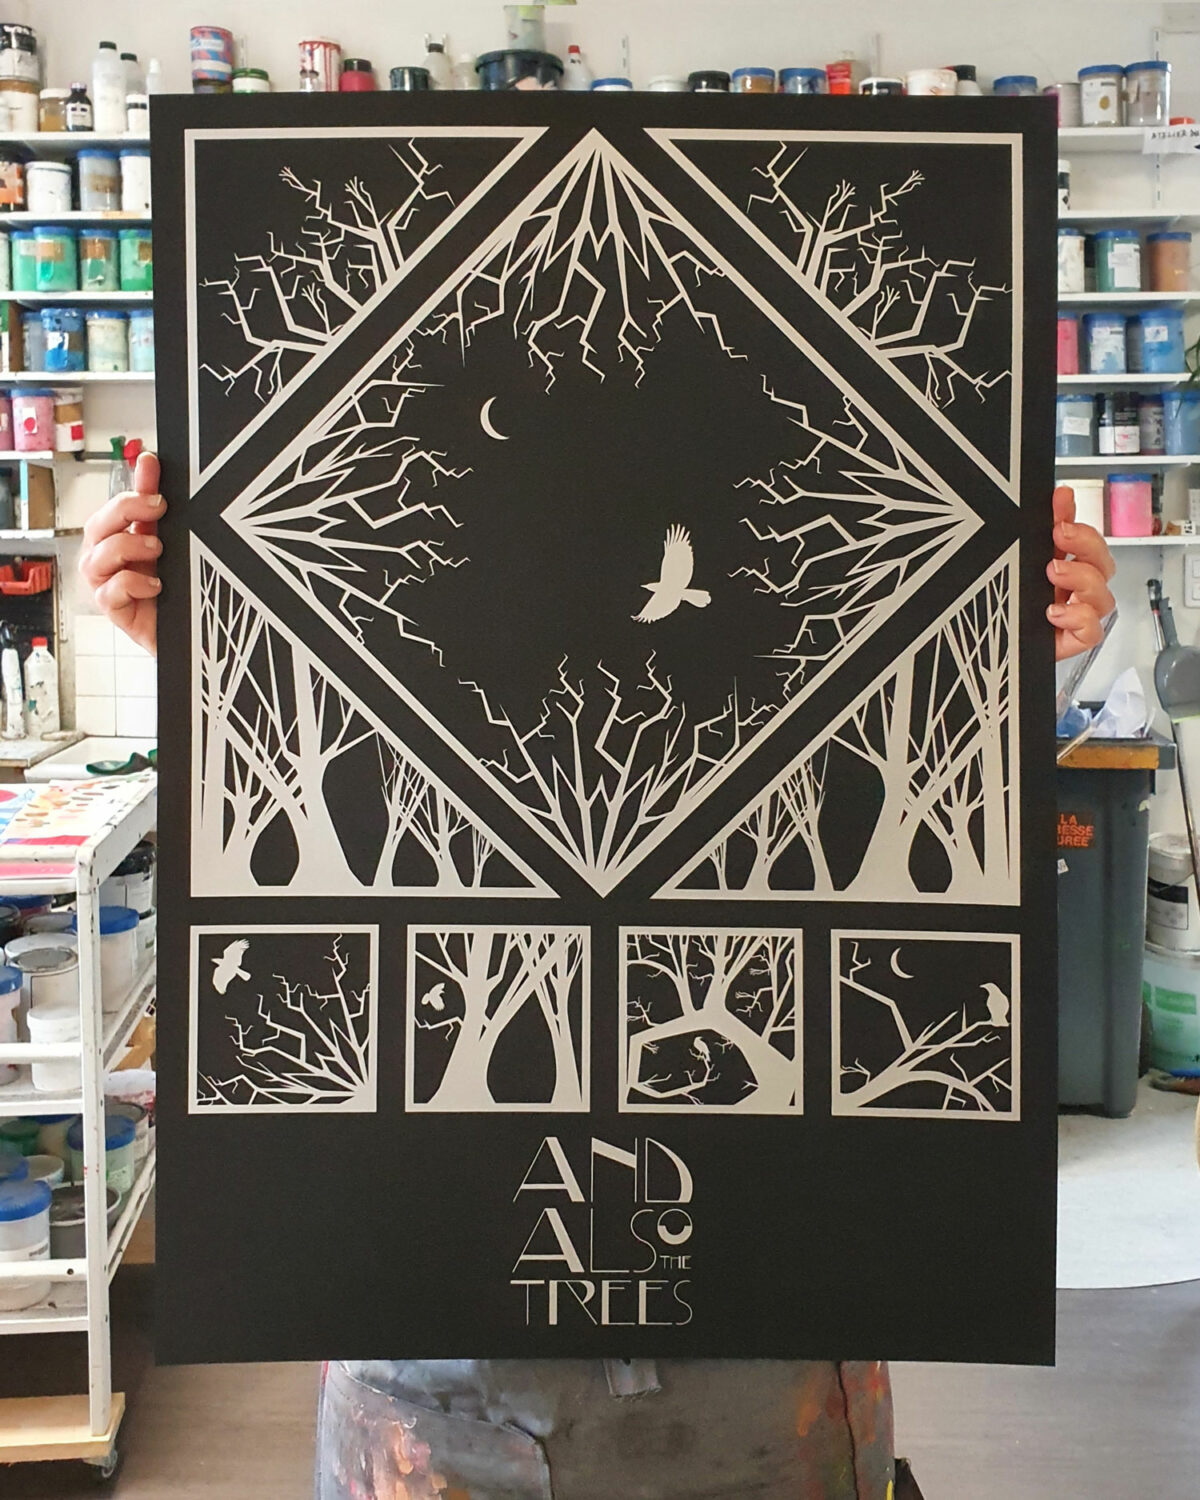 and also the trees poster1